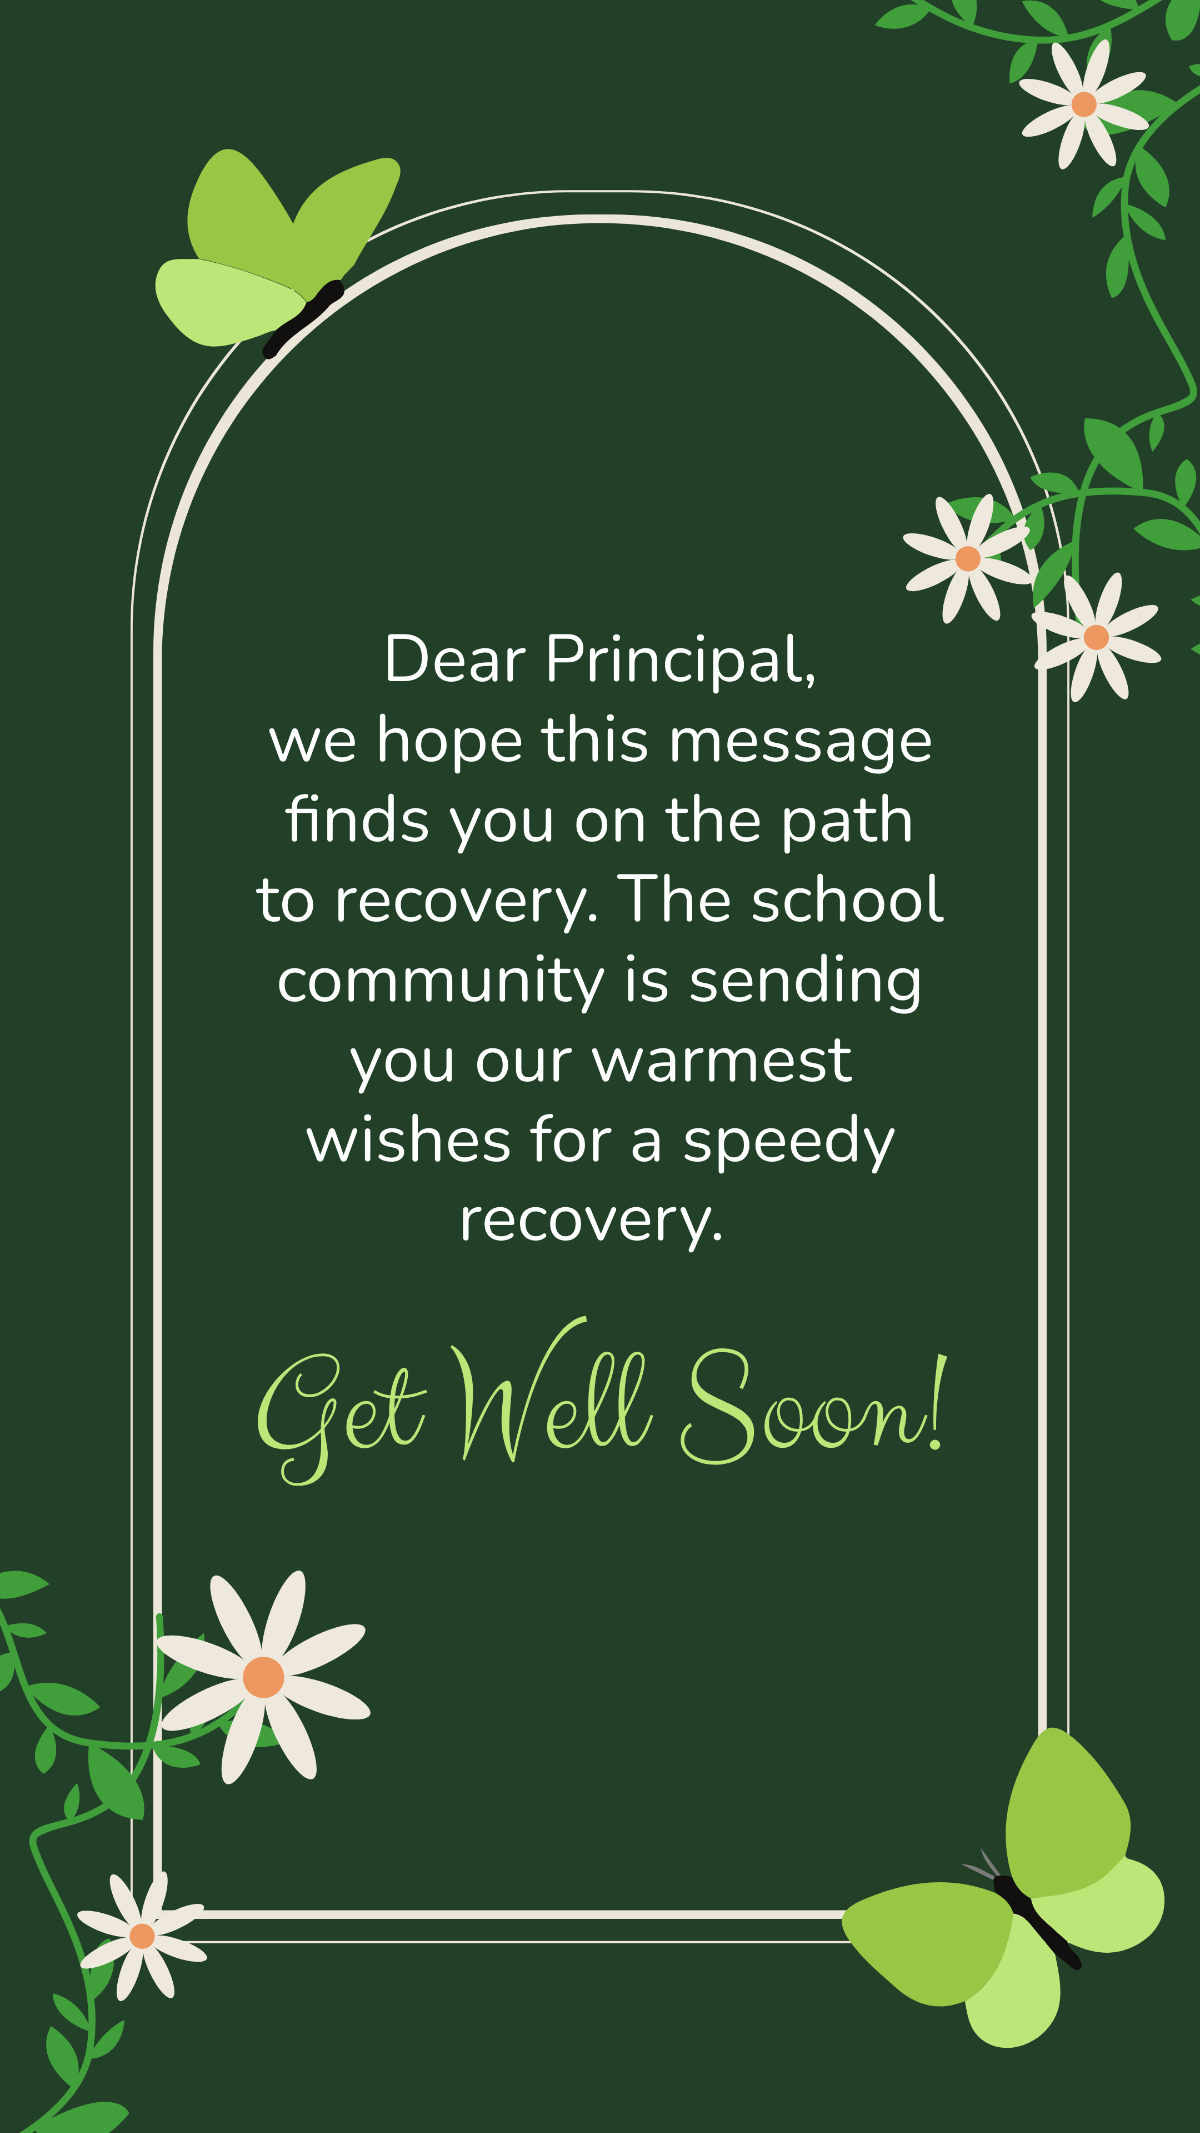 Get Well Soon Message For Principal